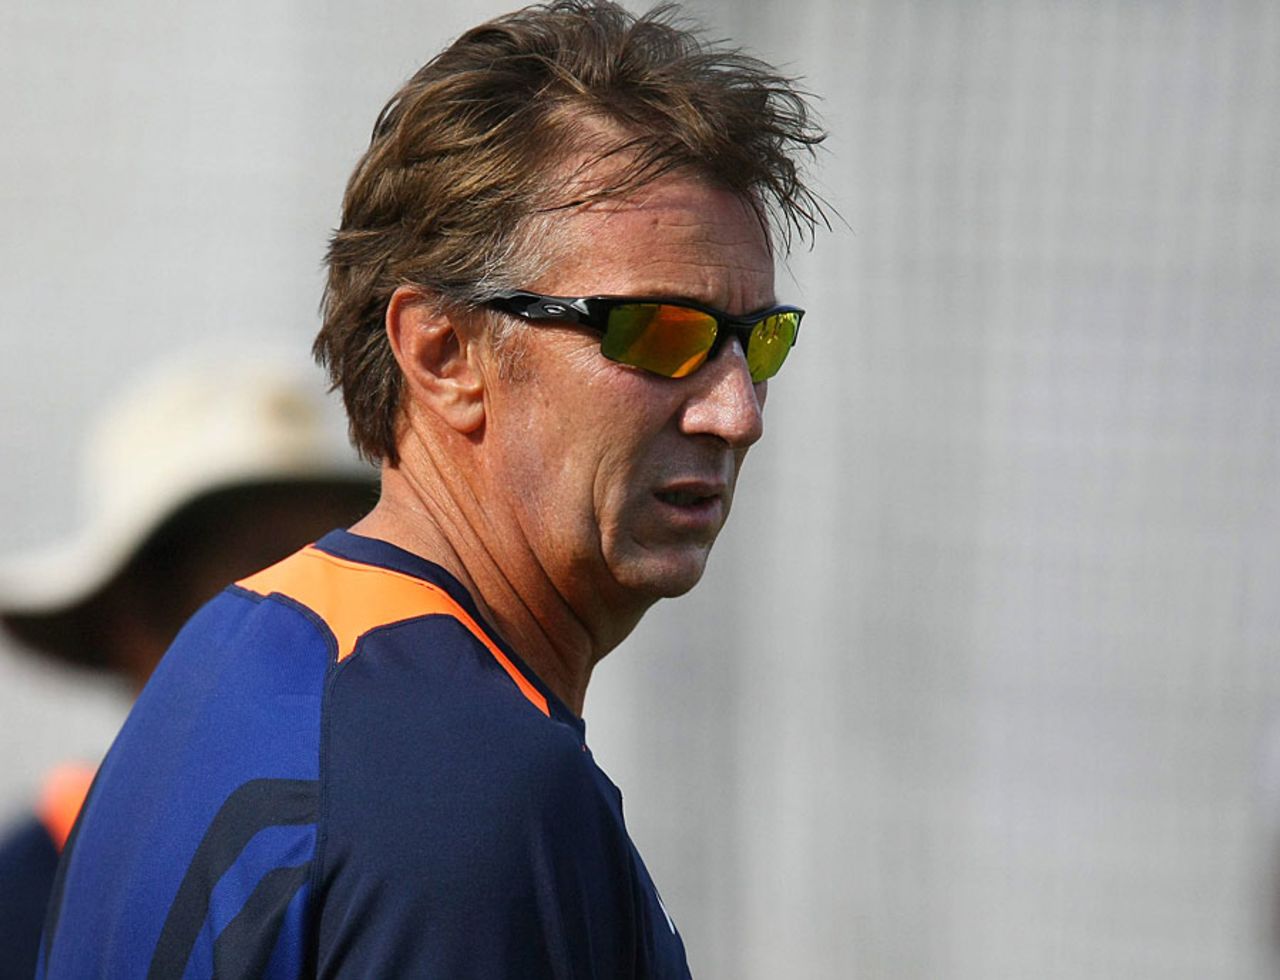 Eric Simons, India's bowling coach, looks on during a nets session, Durban, December 23, 2010